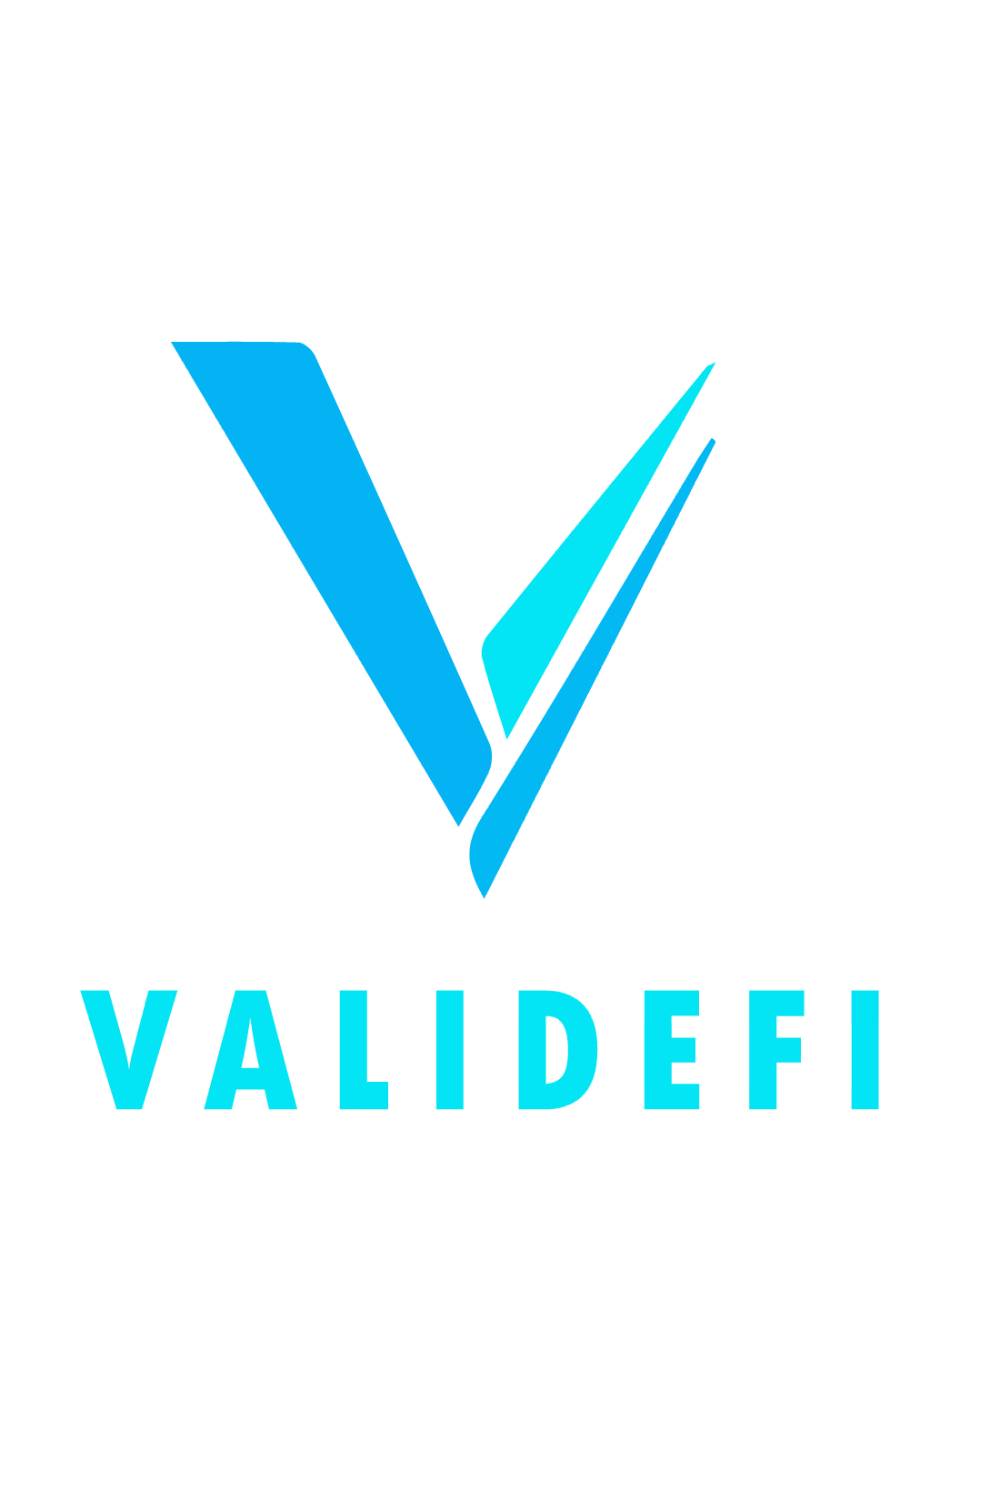 Logo for a company called validefi.